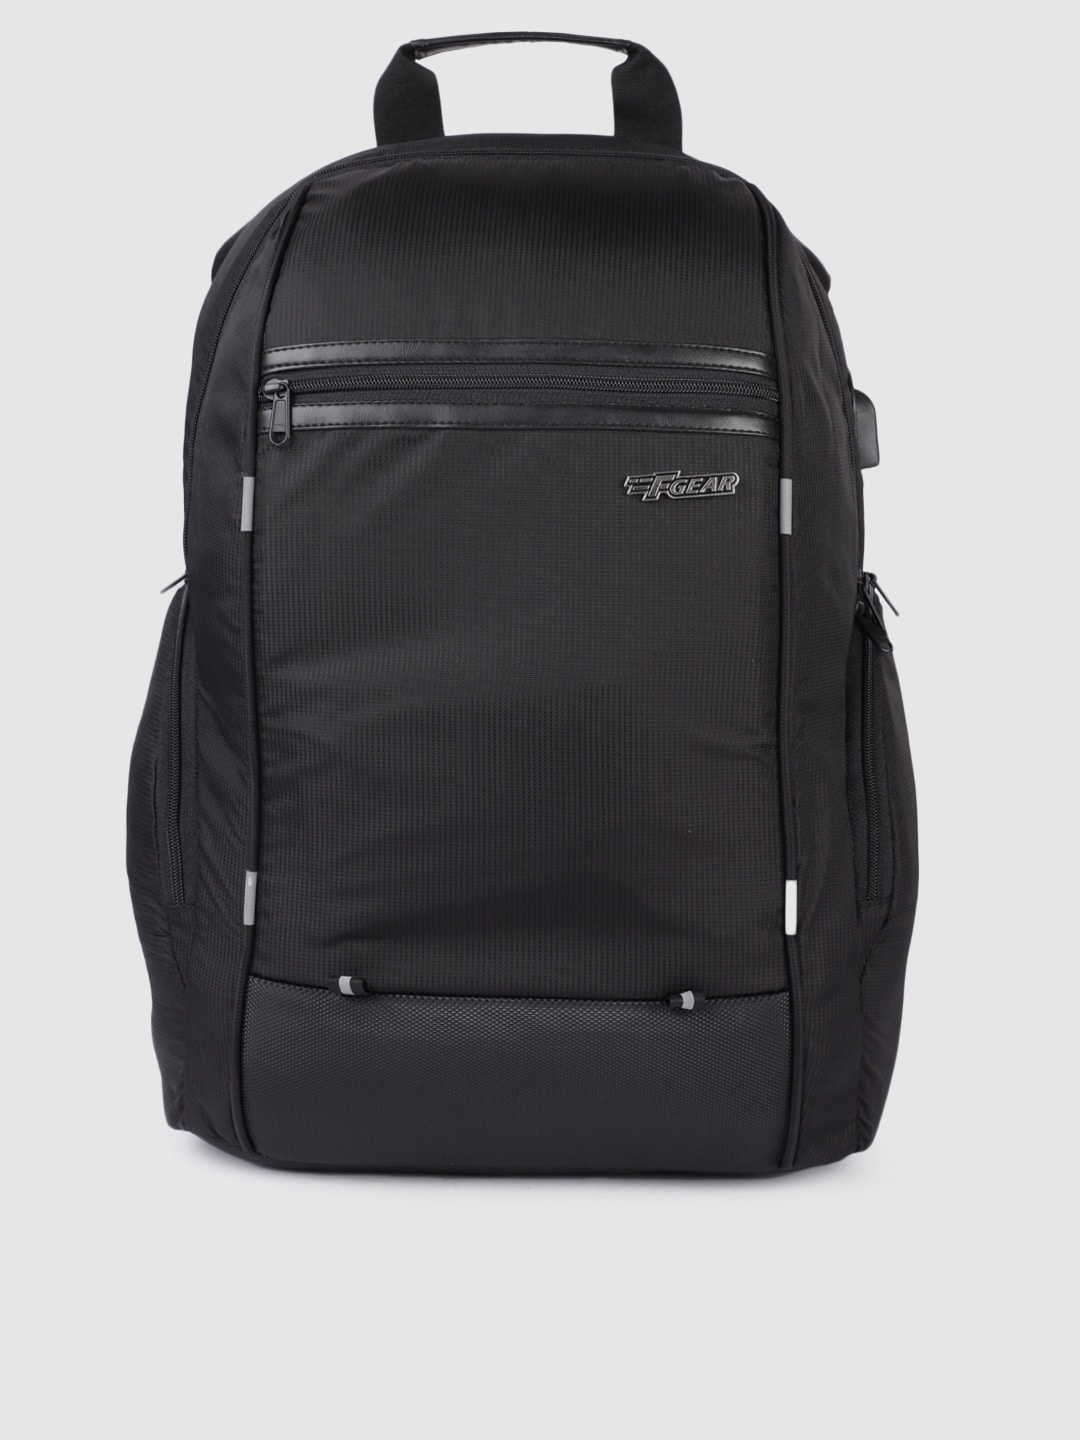 F Gear Unisex Black Solid Marcus Doby Laptop Backpack Price in India